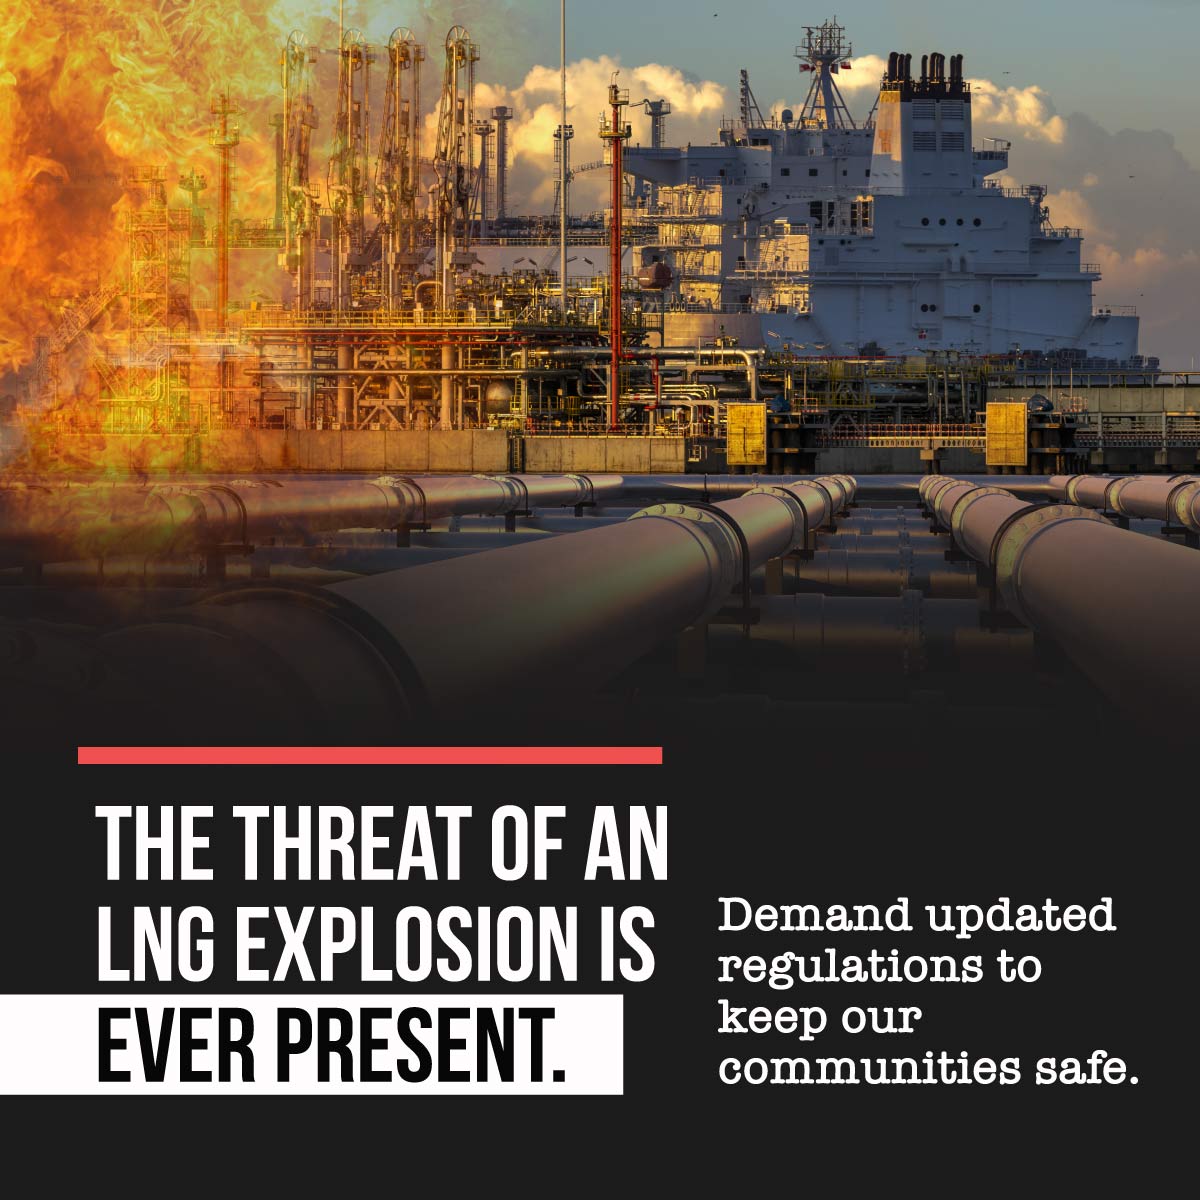 Image of an LNG facility with fire and text on the bottom that says 